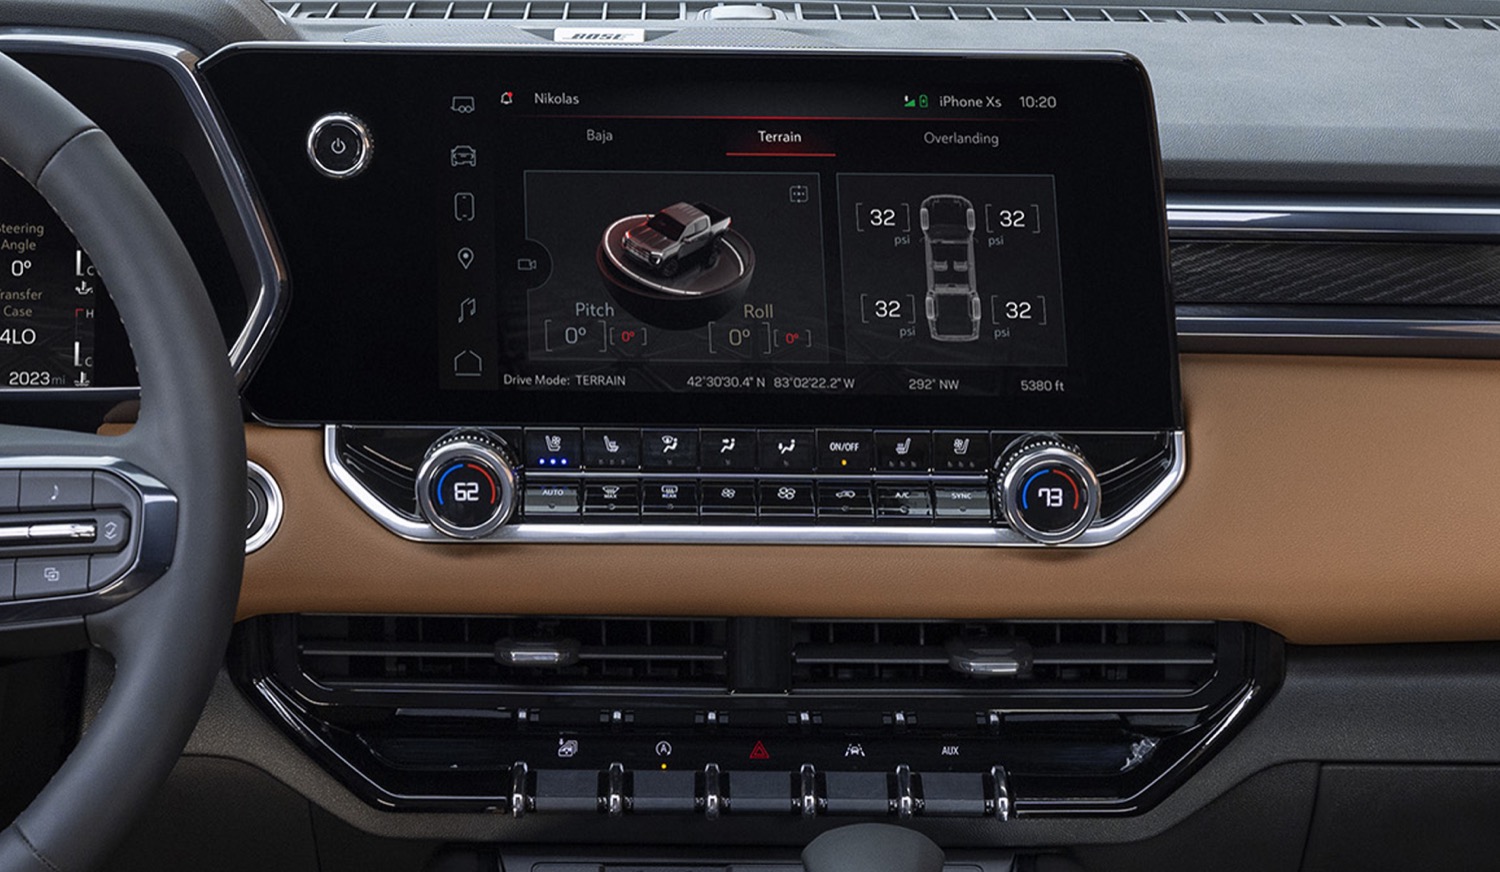 2023-gmc-canyon-at4-interior-004-center-stack-digital-infotainment-screen-climate-control